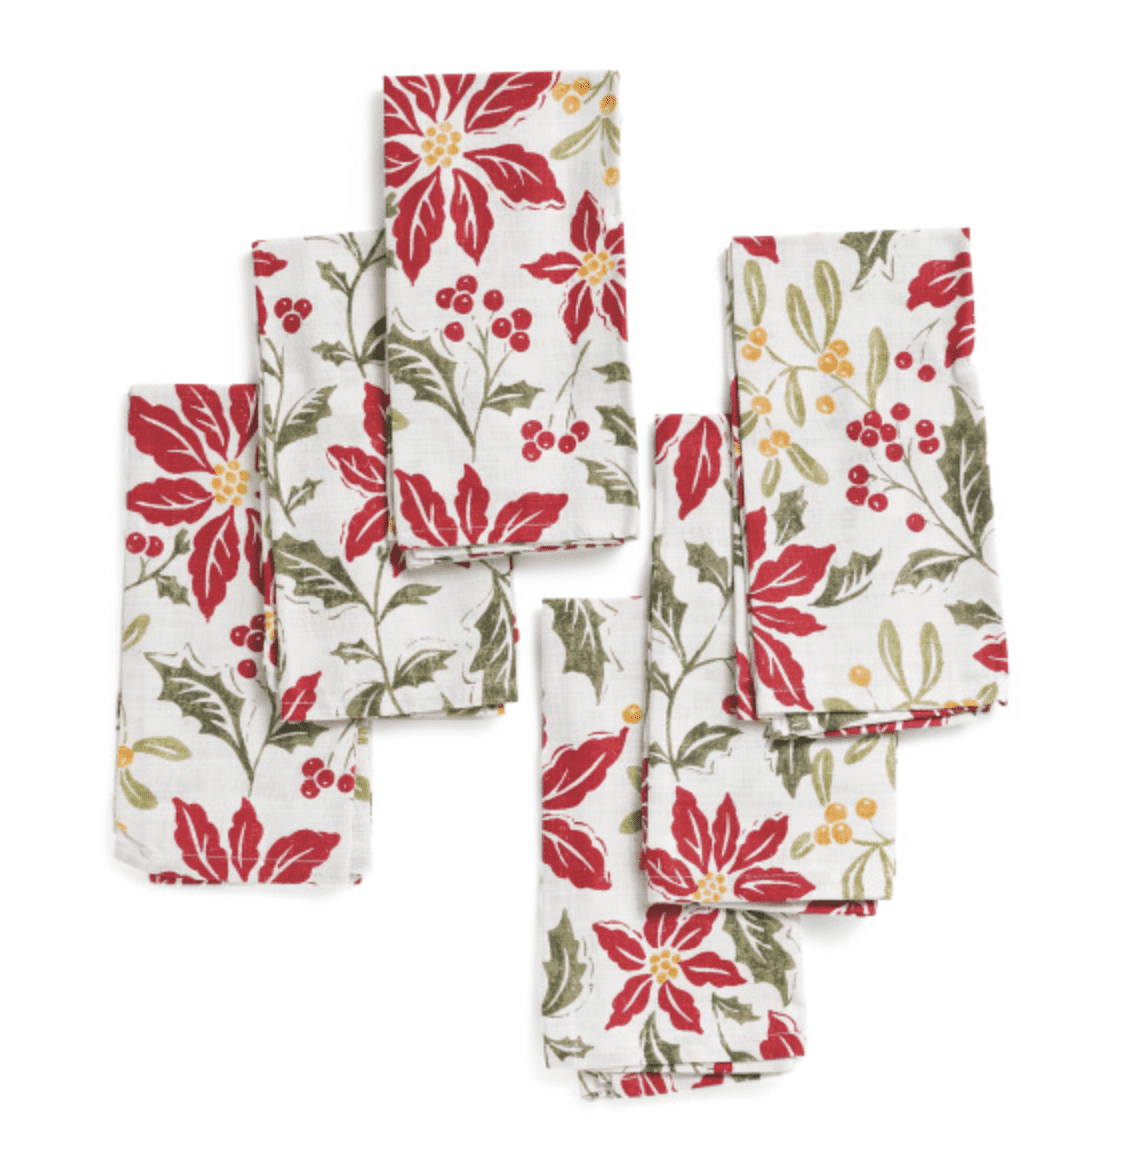 Six-pack of print block napkins featuring a pattern of poinsettias, berries, and leaves against a white background